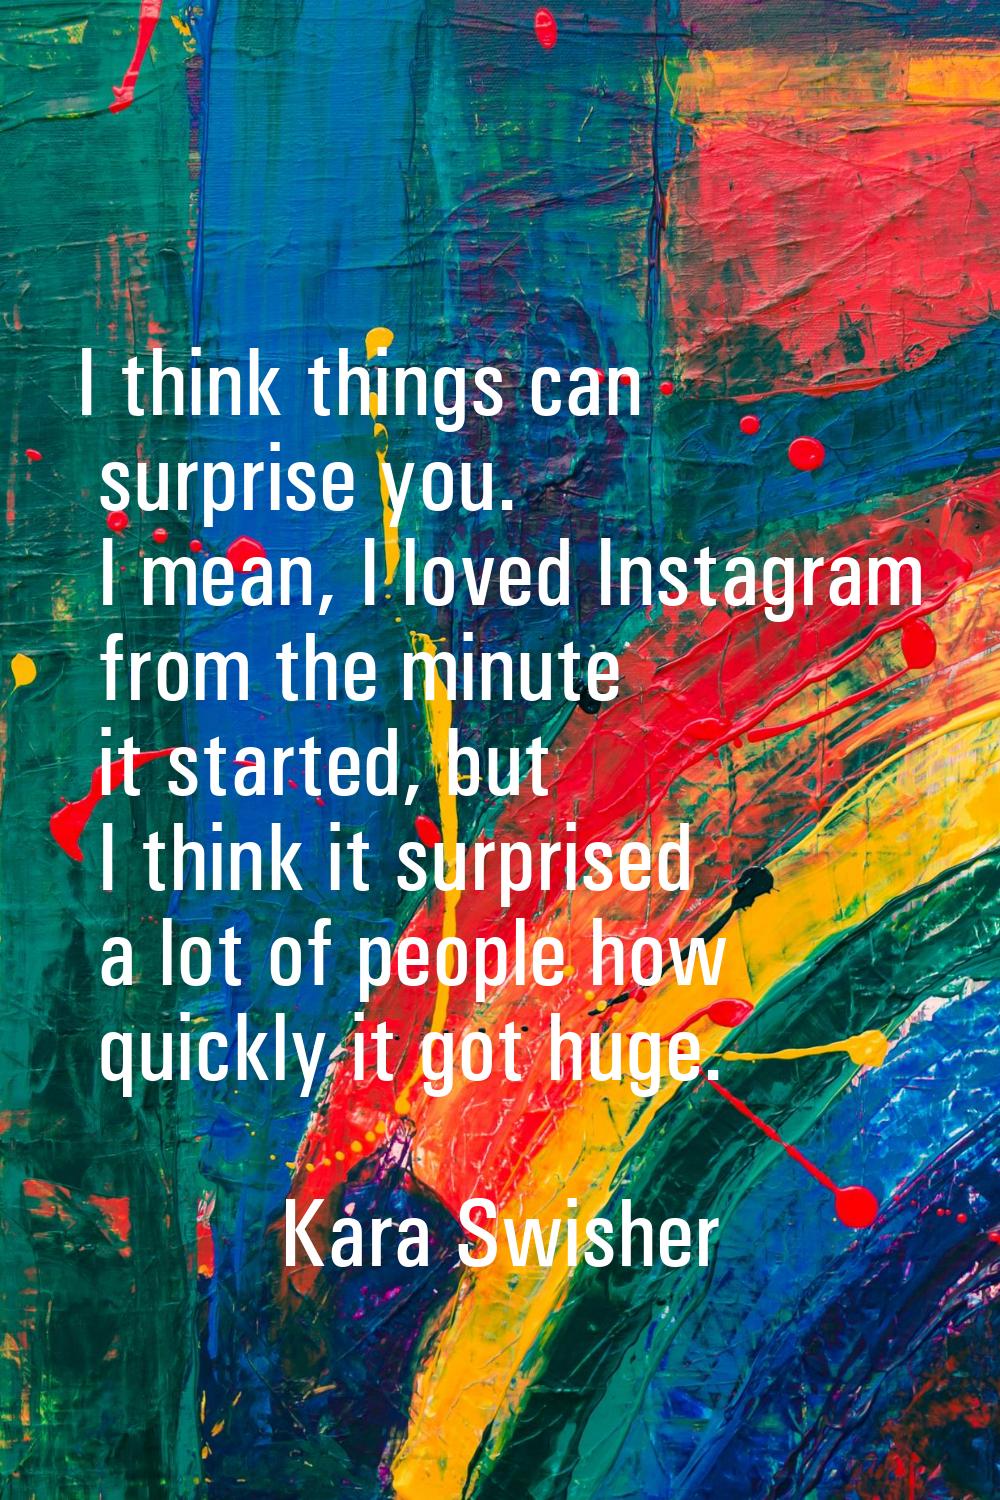 I think things can surprise you. I mean, I loved Instagram from the minute it started, but I think 